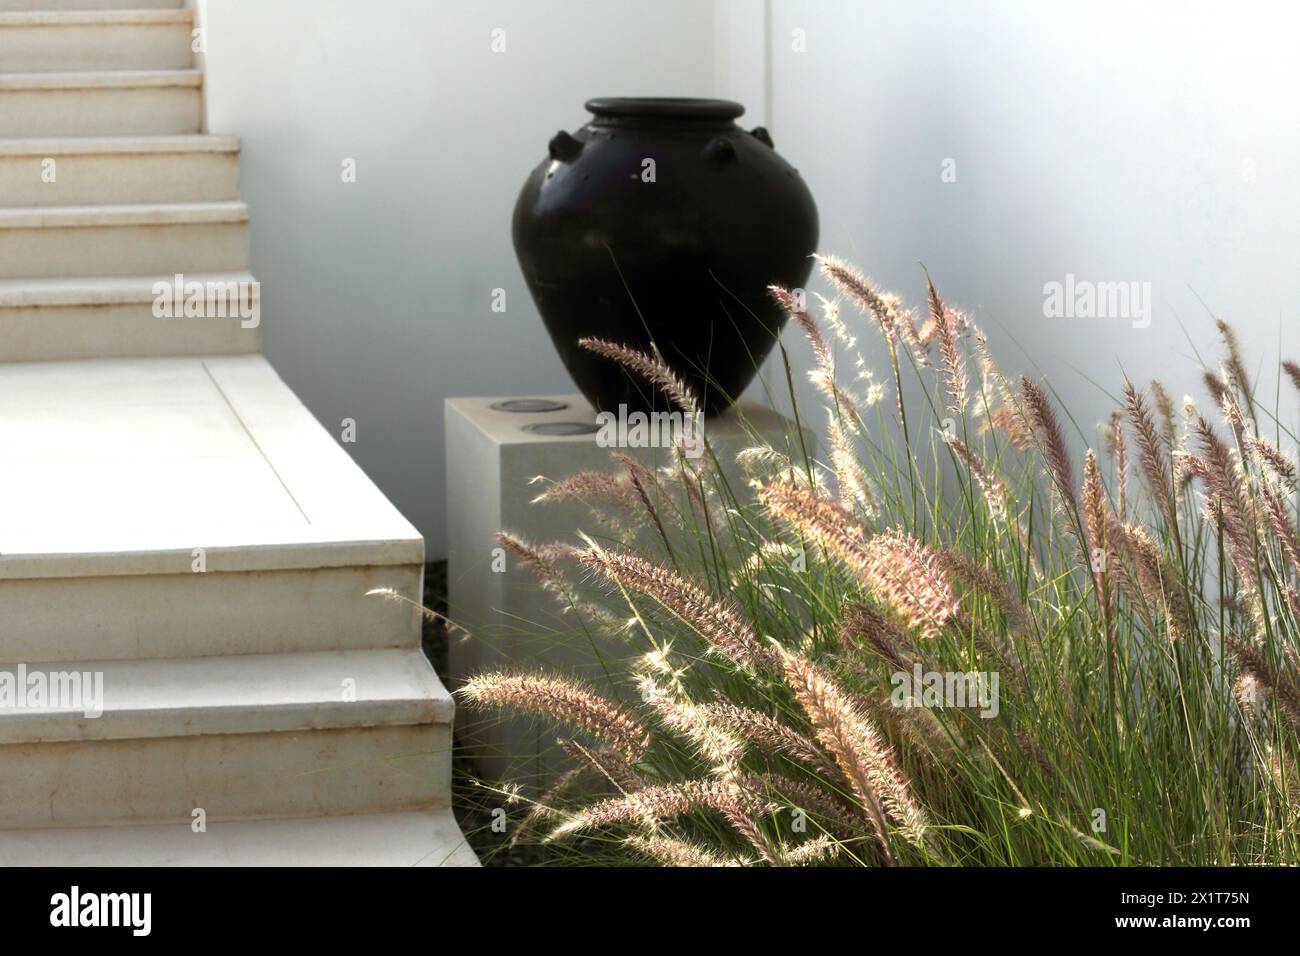 Black Pot by Miniature Fountain Grass (Pennisetum Setaceum) at The Chedi Hotel Muscat Oman Stock Photo